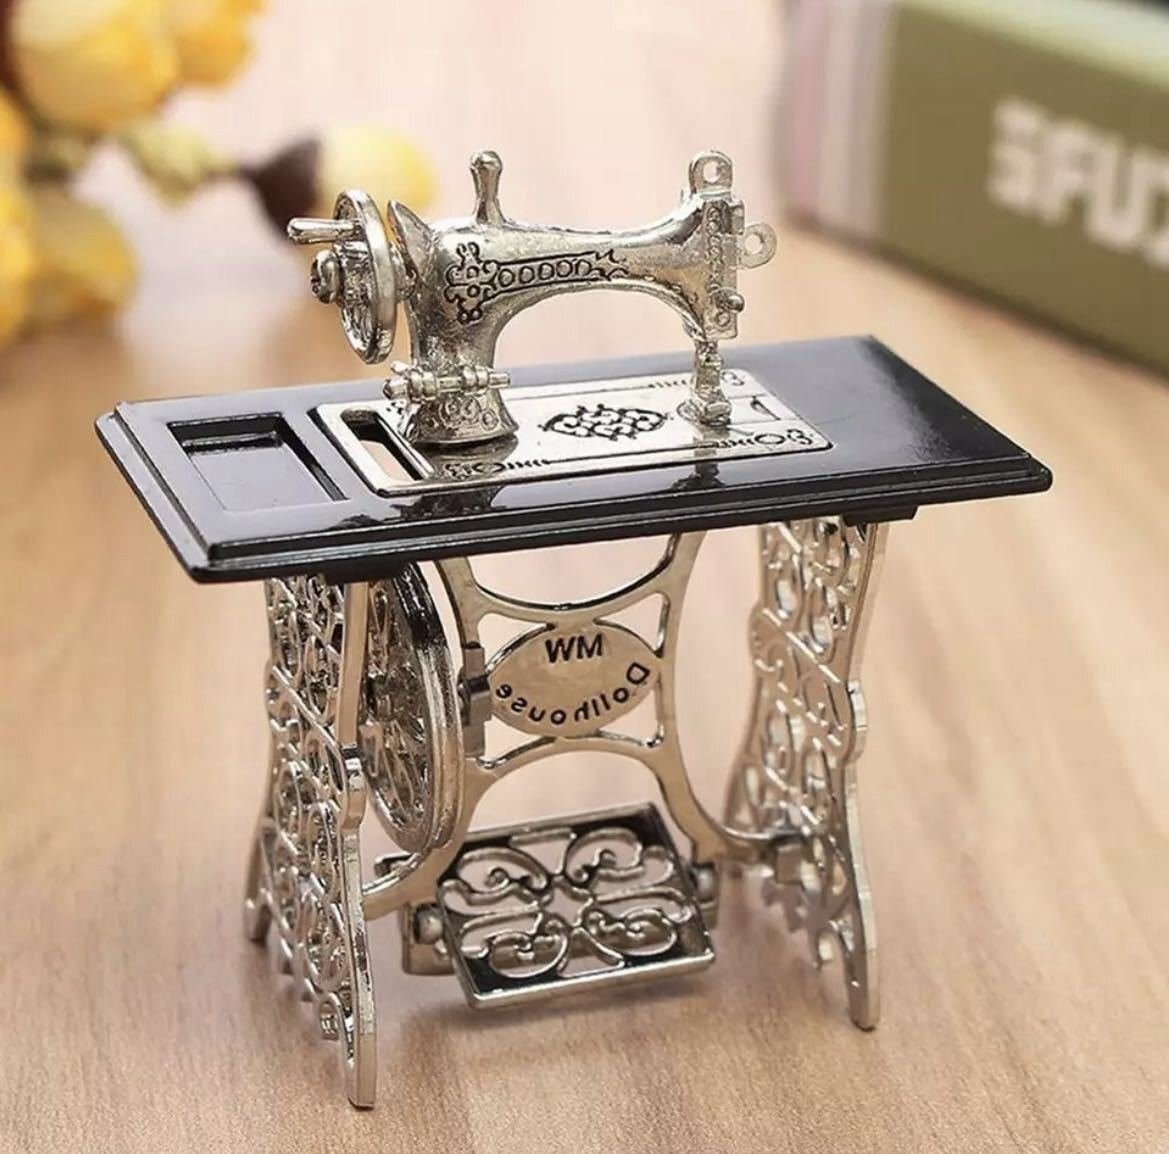 Miniature Sewing Machine Sewing Machine for Dollhouse Vintage Accessories Retro Miscellaneous Goods Interior Figurine Small Object Decoration HD225, Handmade items, interior, miscellaneous goods, ornament, object